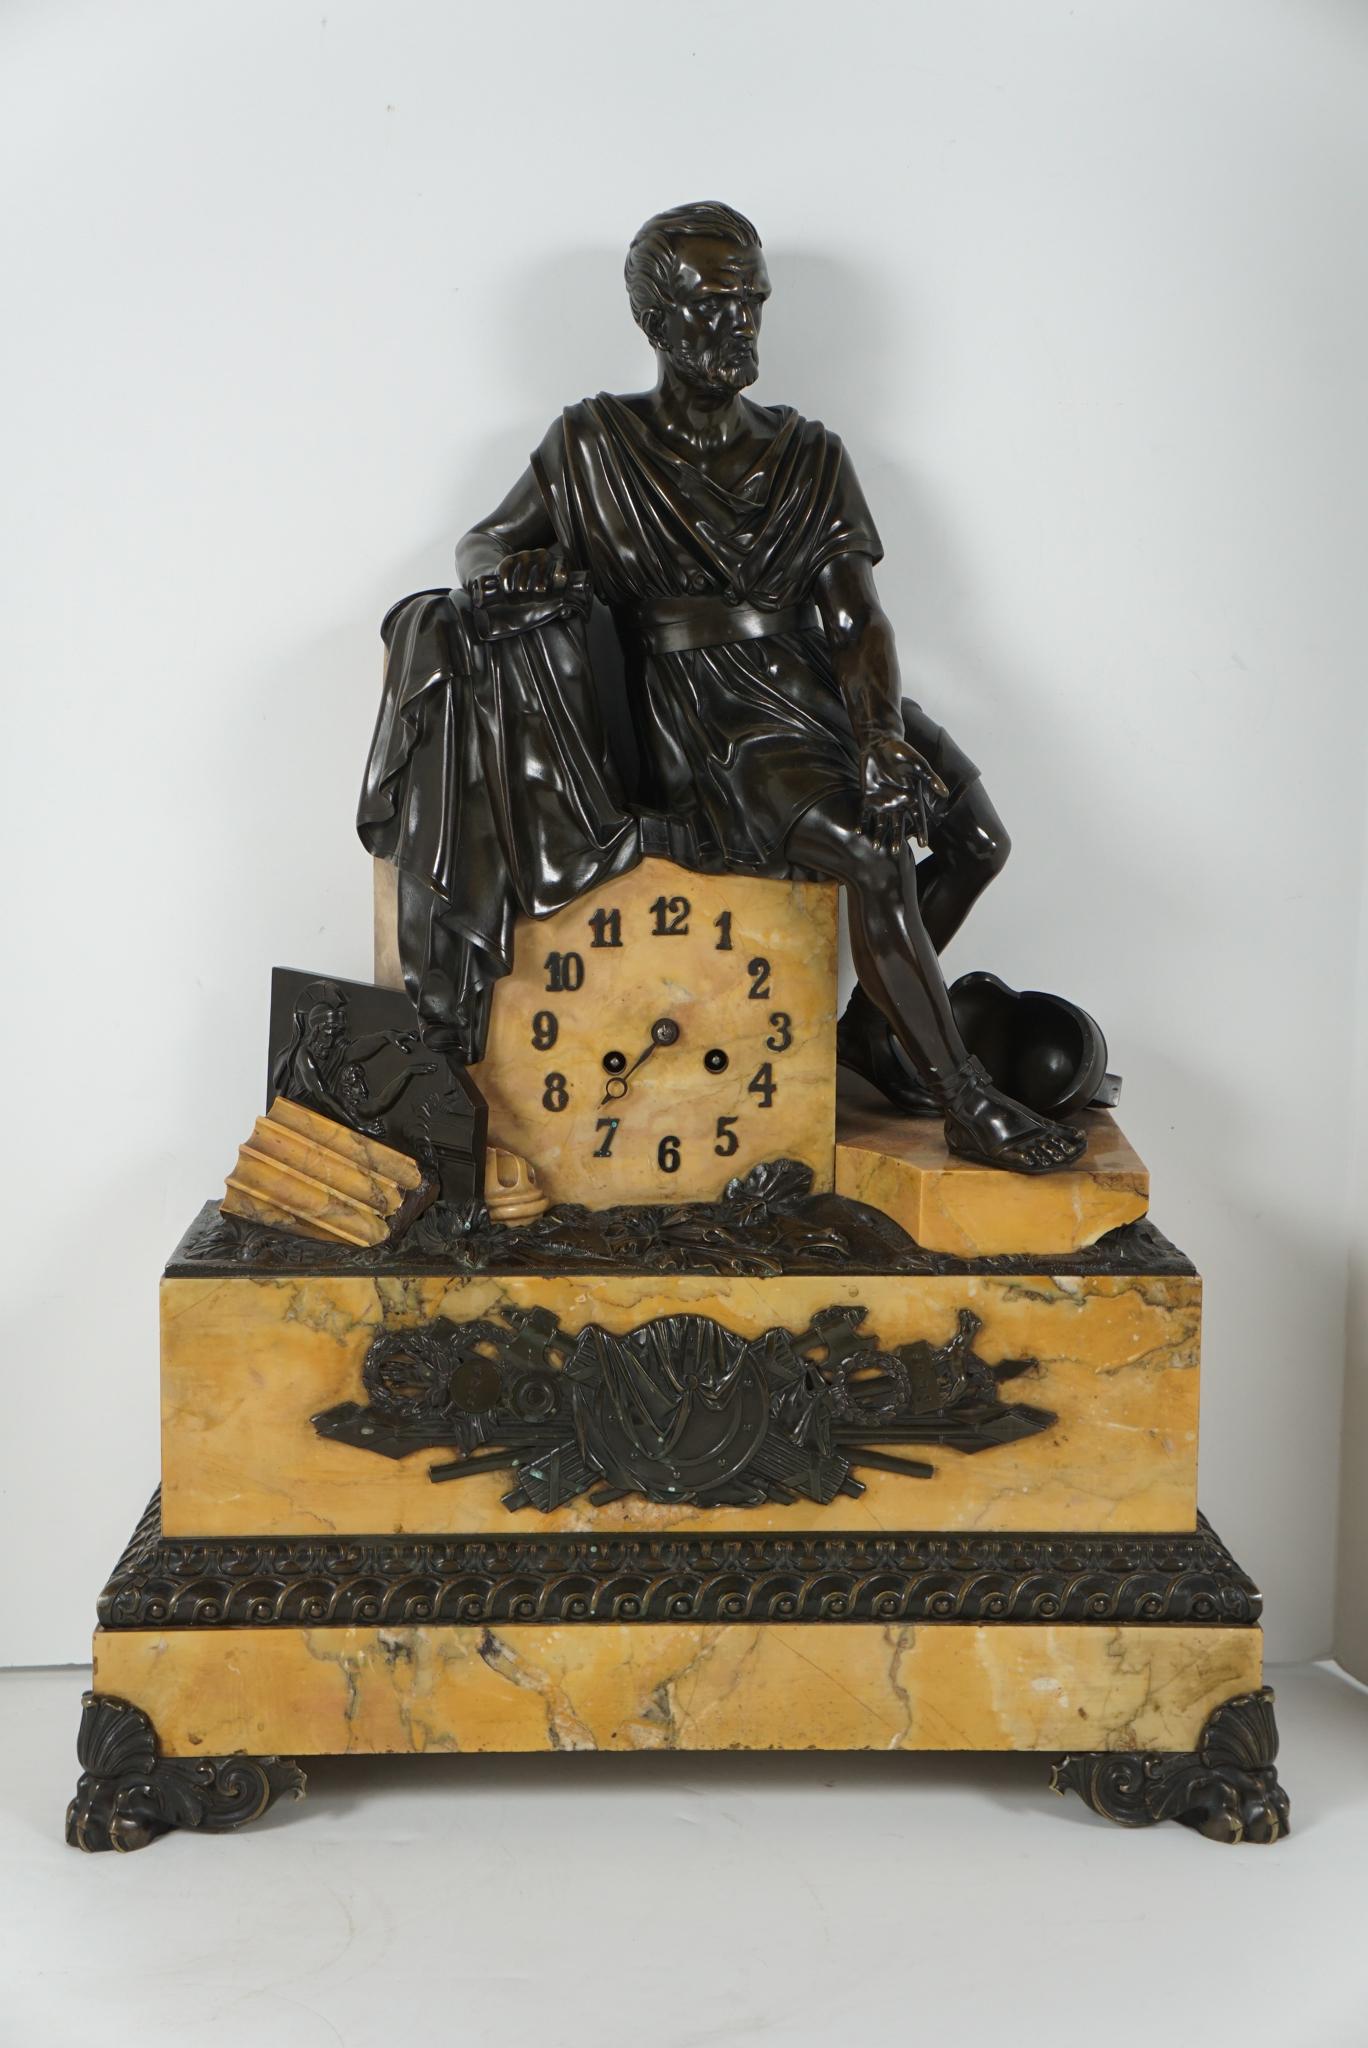 This large and impressive clock was made in France, circa 1830. Composed as an allegorical statement of the classical past the bronze work is of the finest quality. Cast in many separate parts and then attached to give great depth and articulation,